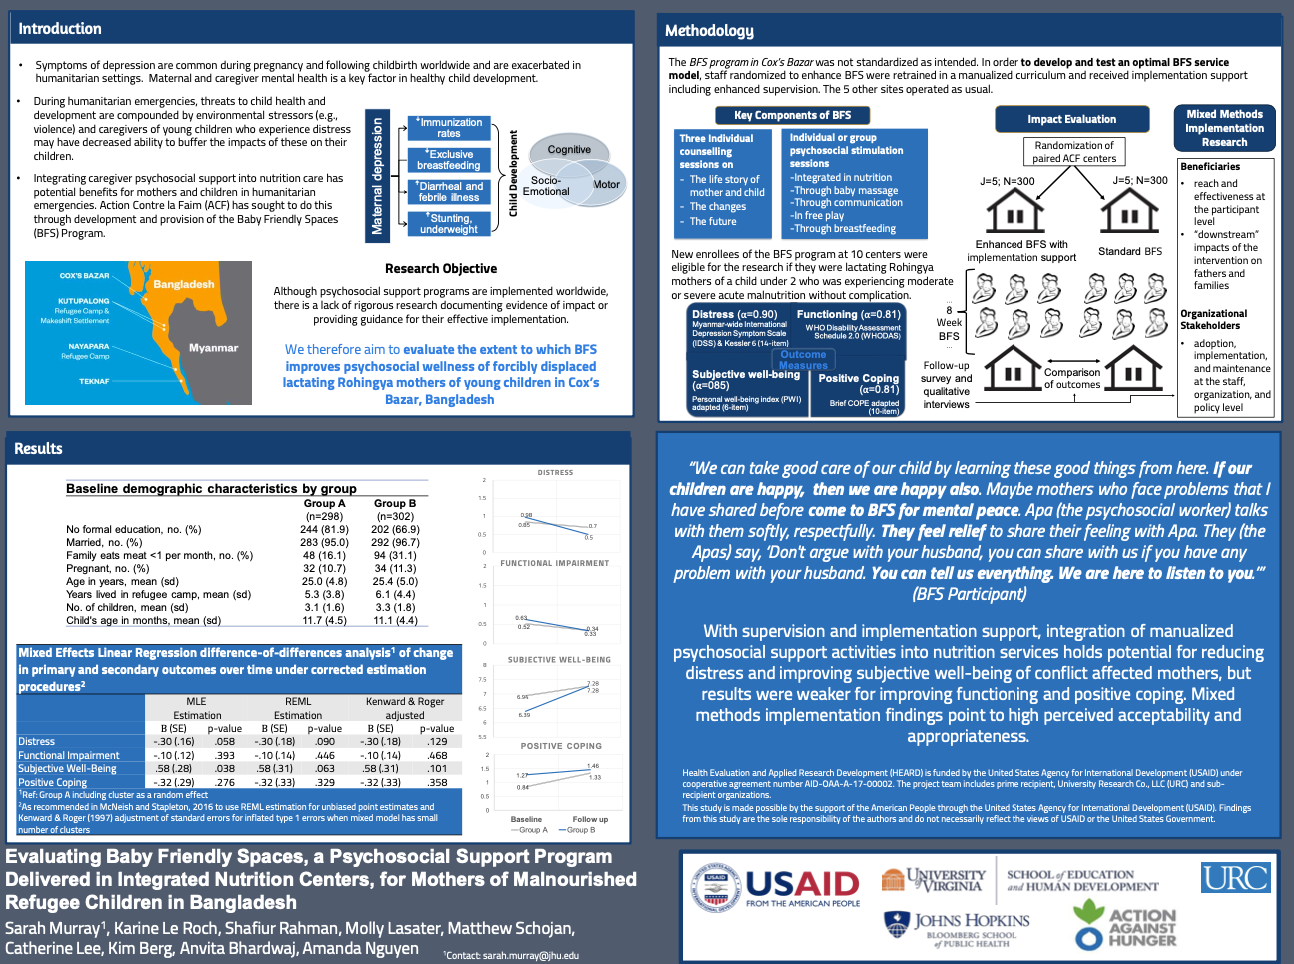 Evaluating Baby Friendly Spaces, a Psychosocial Support Program Delivered in Integrated Nutrition Centers, for Mothers of Malnourished Refugee Children in Bangladesh poster